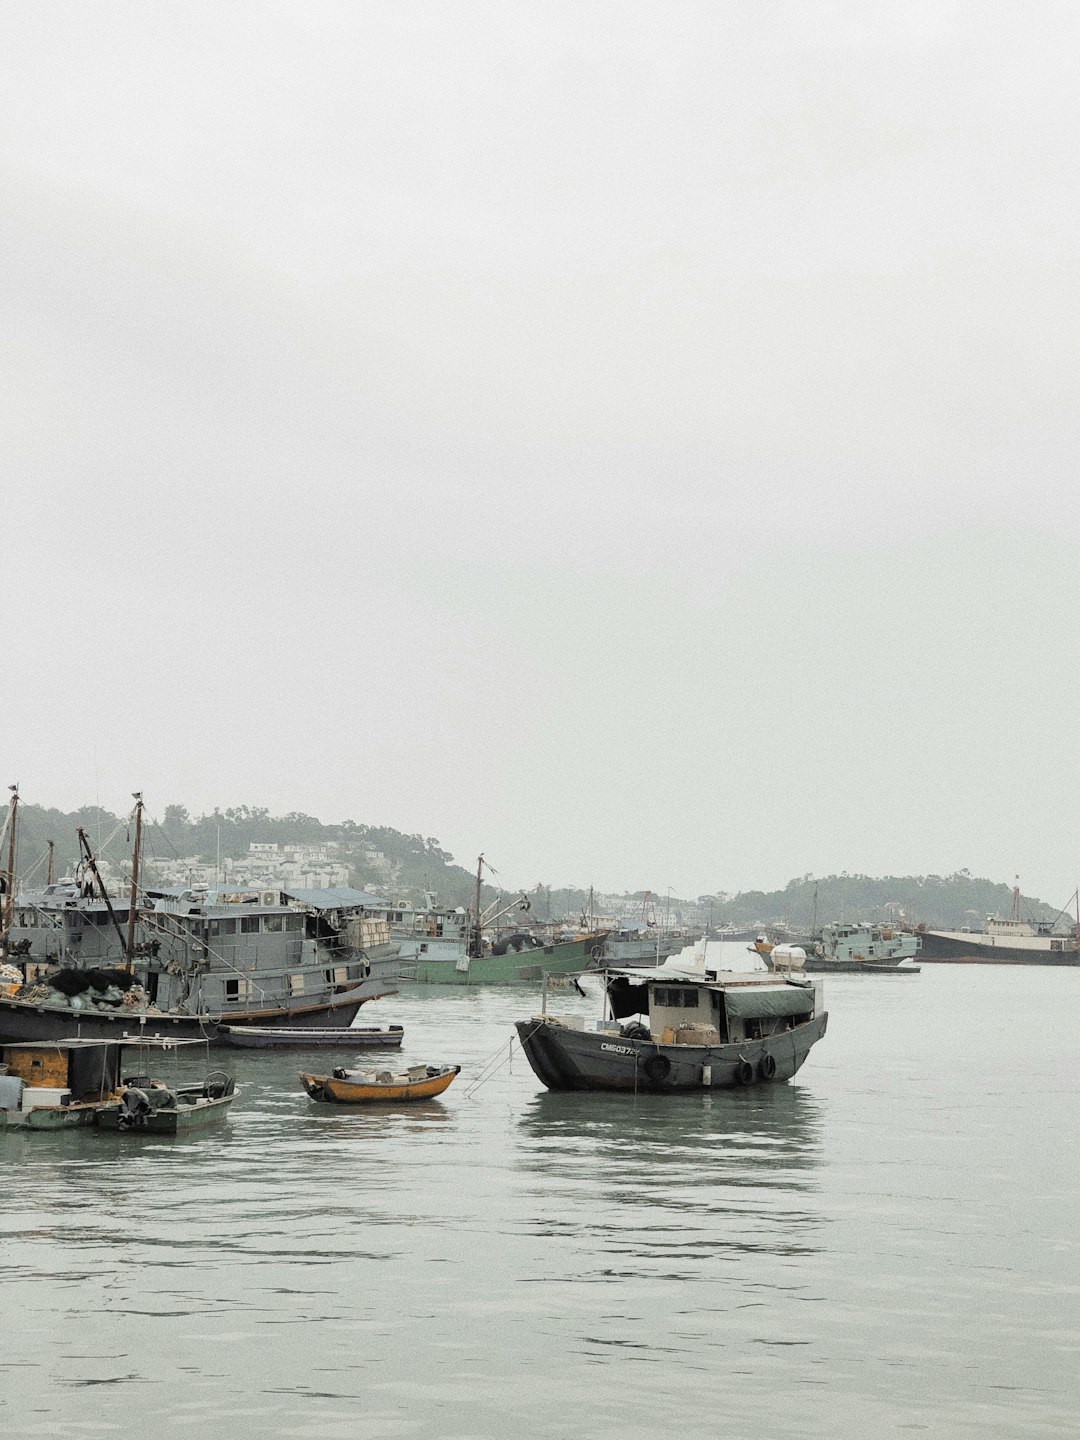 Travel Tips and Stories of Cheung Chau in Hong Kong